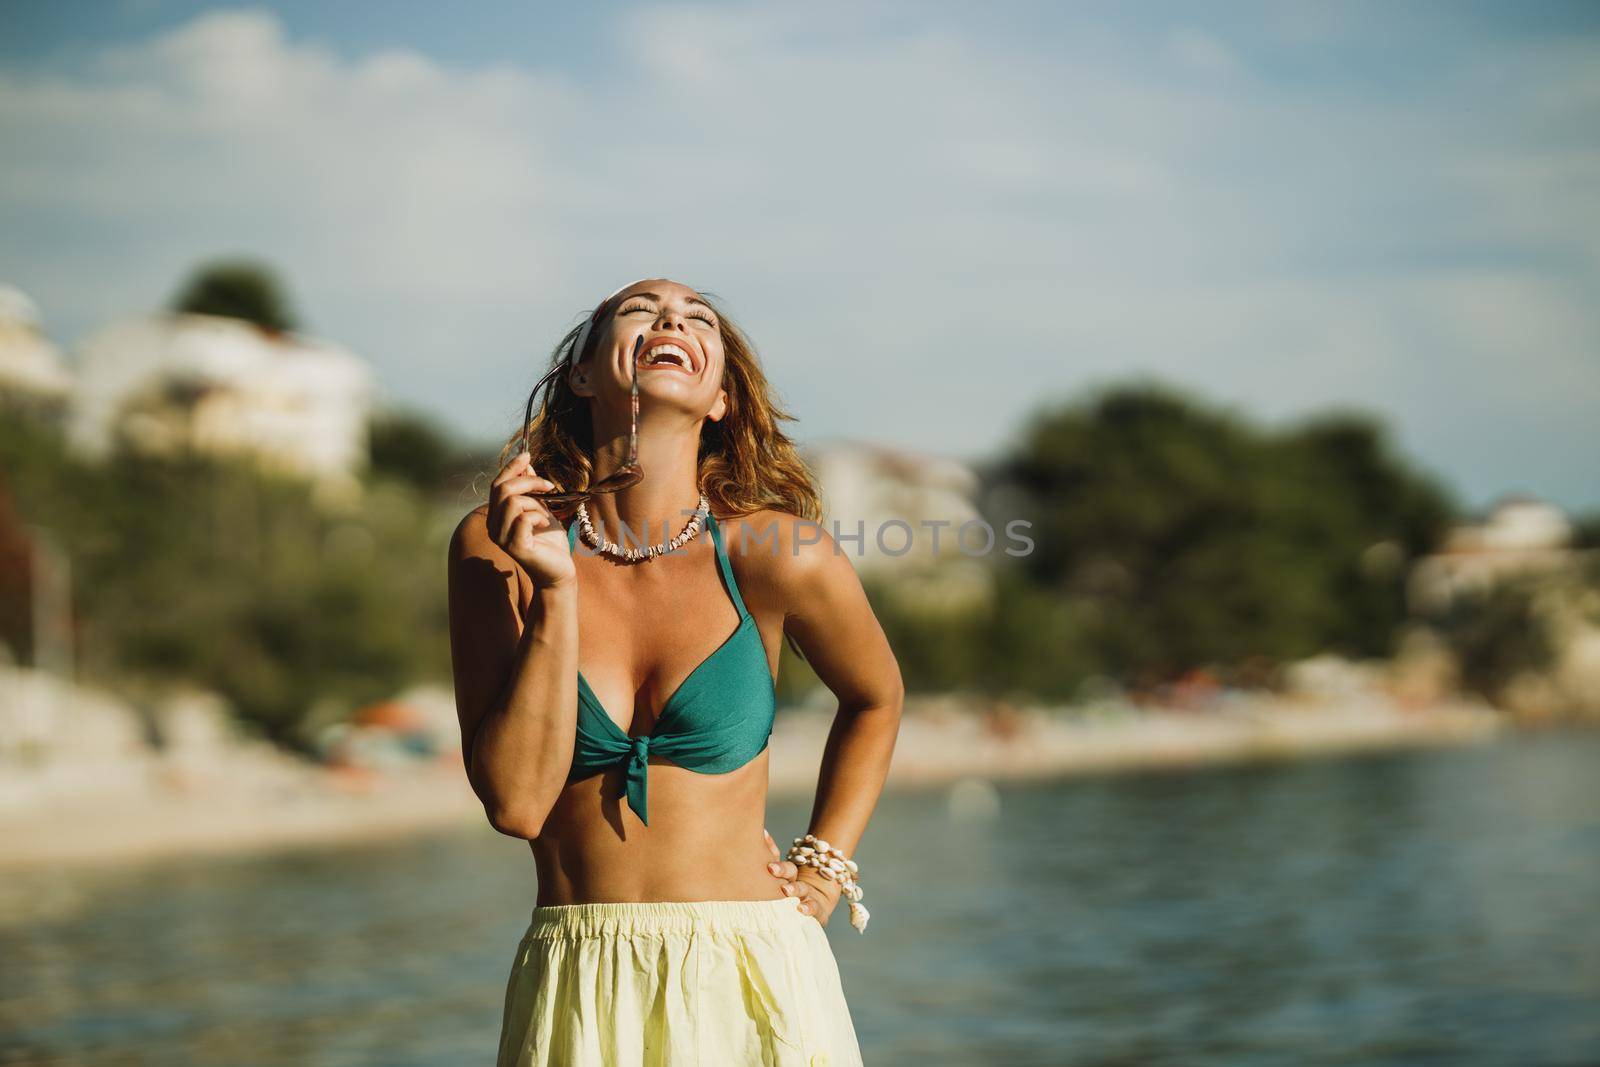 Summer And Smiles by MilanMarkovic78